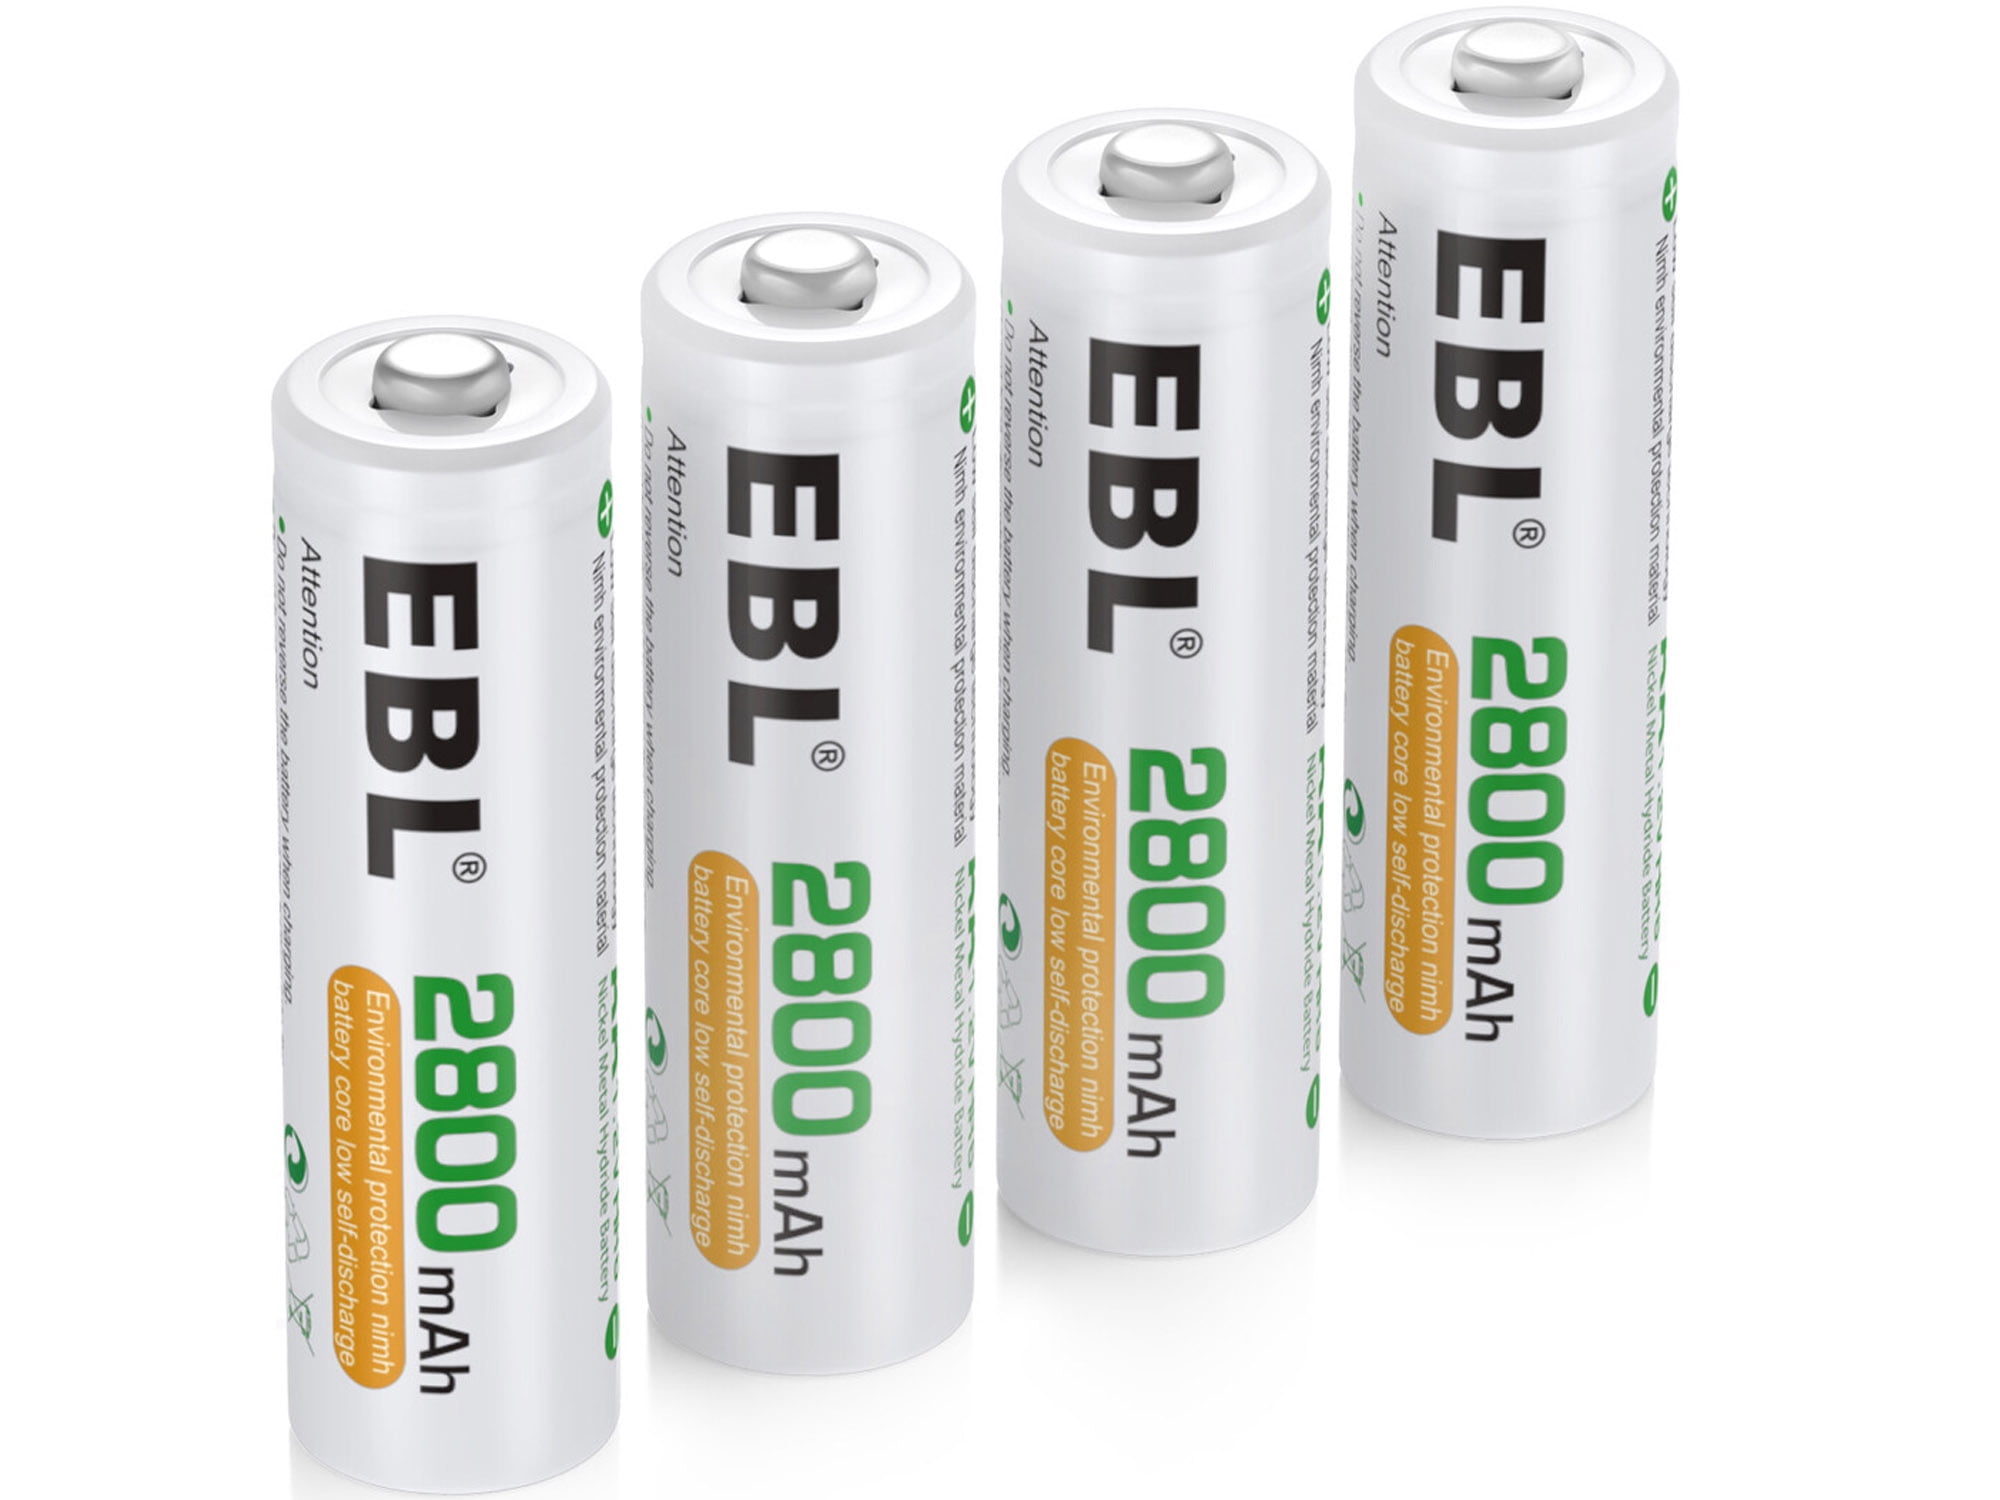 EBL Rechargeable AA Batteries, 2300mAh NiMH Precharged Home Basic